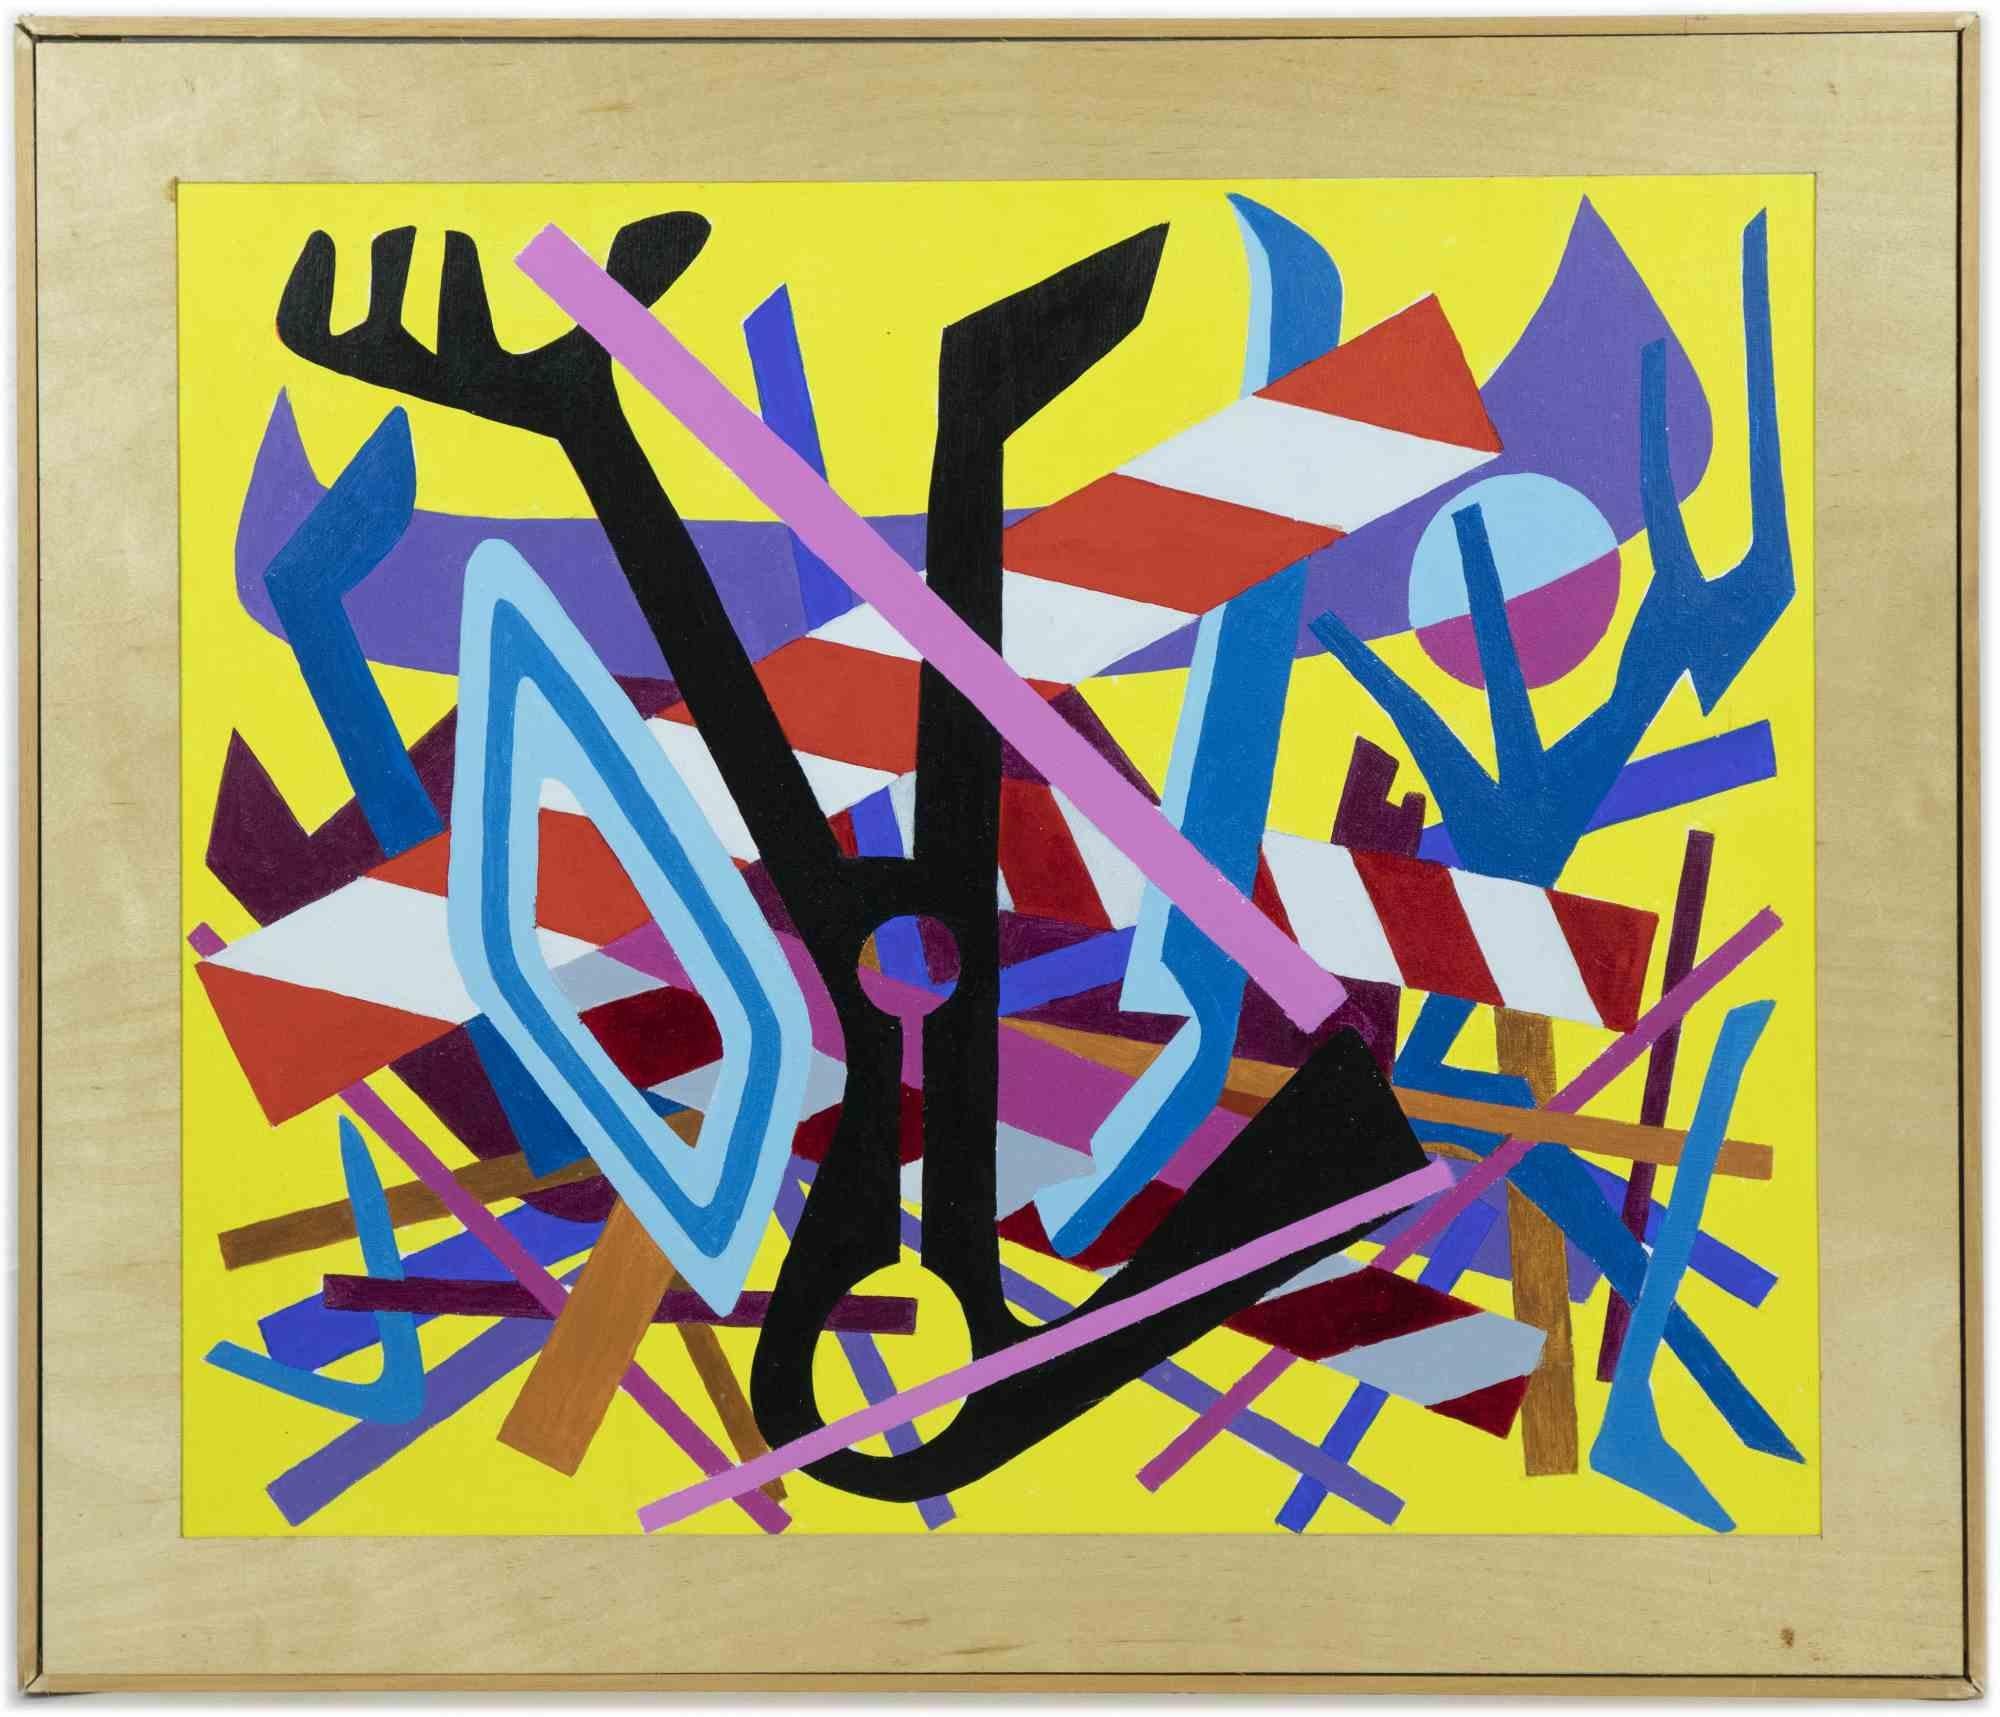 Abstract composition is an original contemporary artwork realized by Leo Guida in 1970s

Mixed colored tempera on plywood.

Leo Guida  (1992 - 2017). Sensitive to current issues, artistic movements and historical techniques, Leo Guida has been able